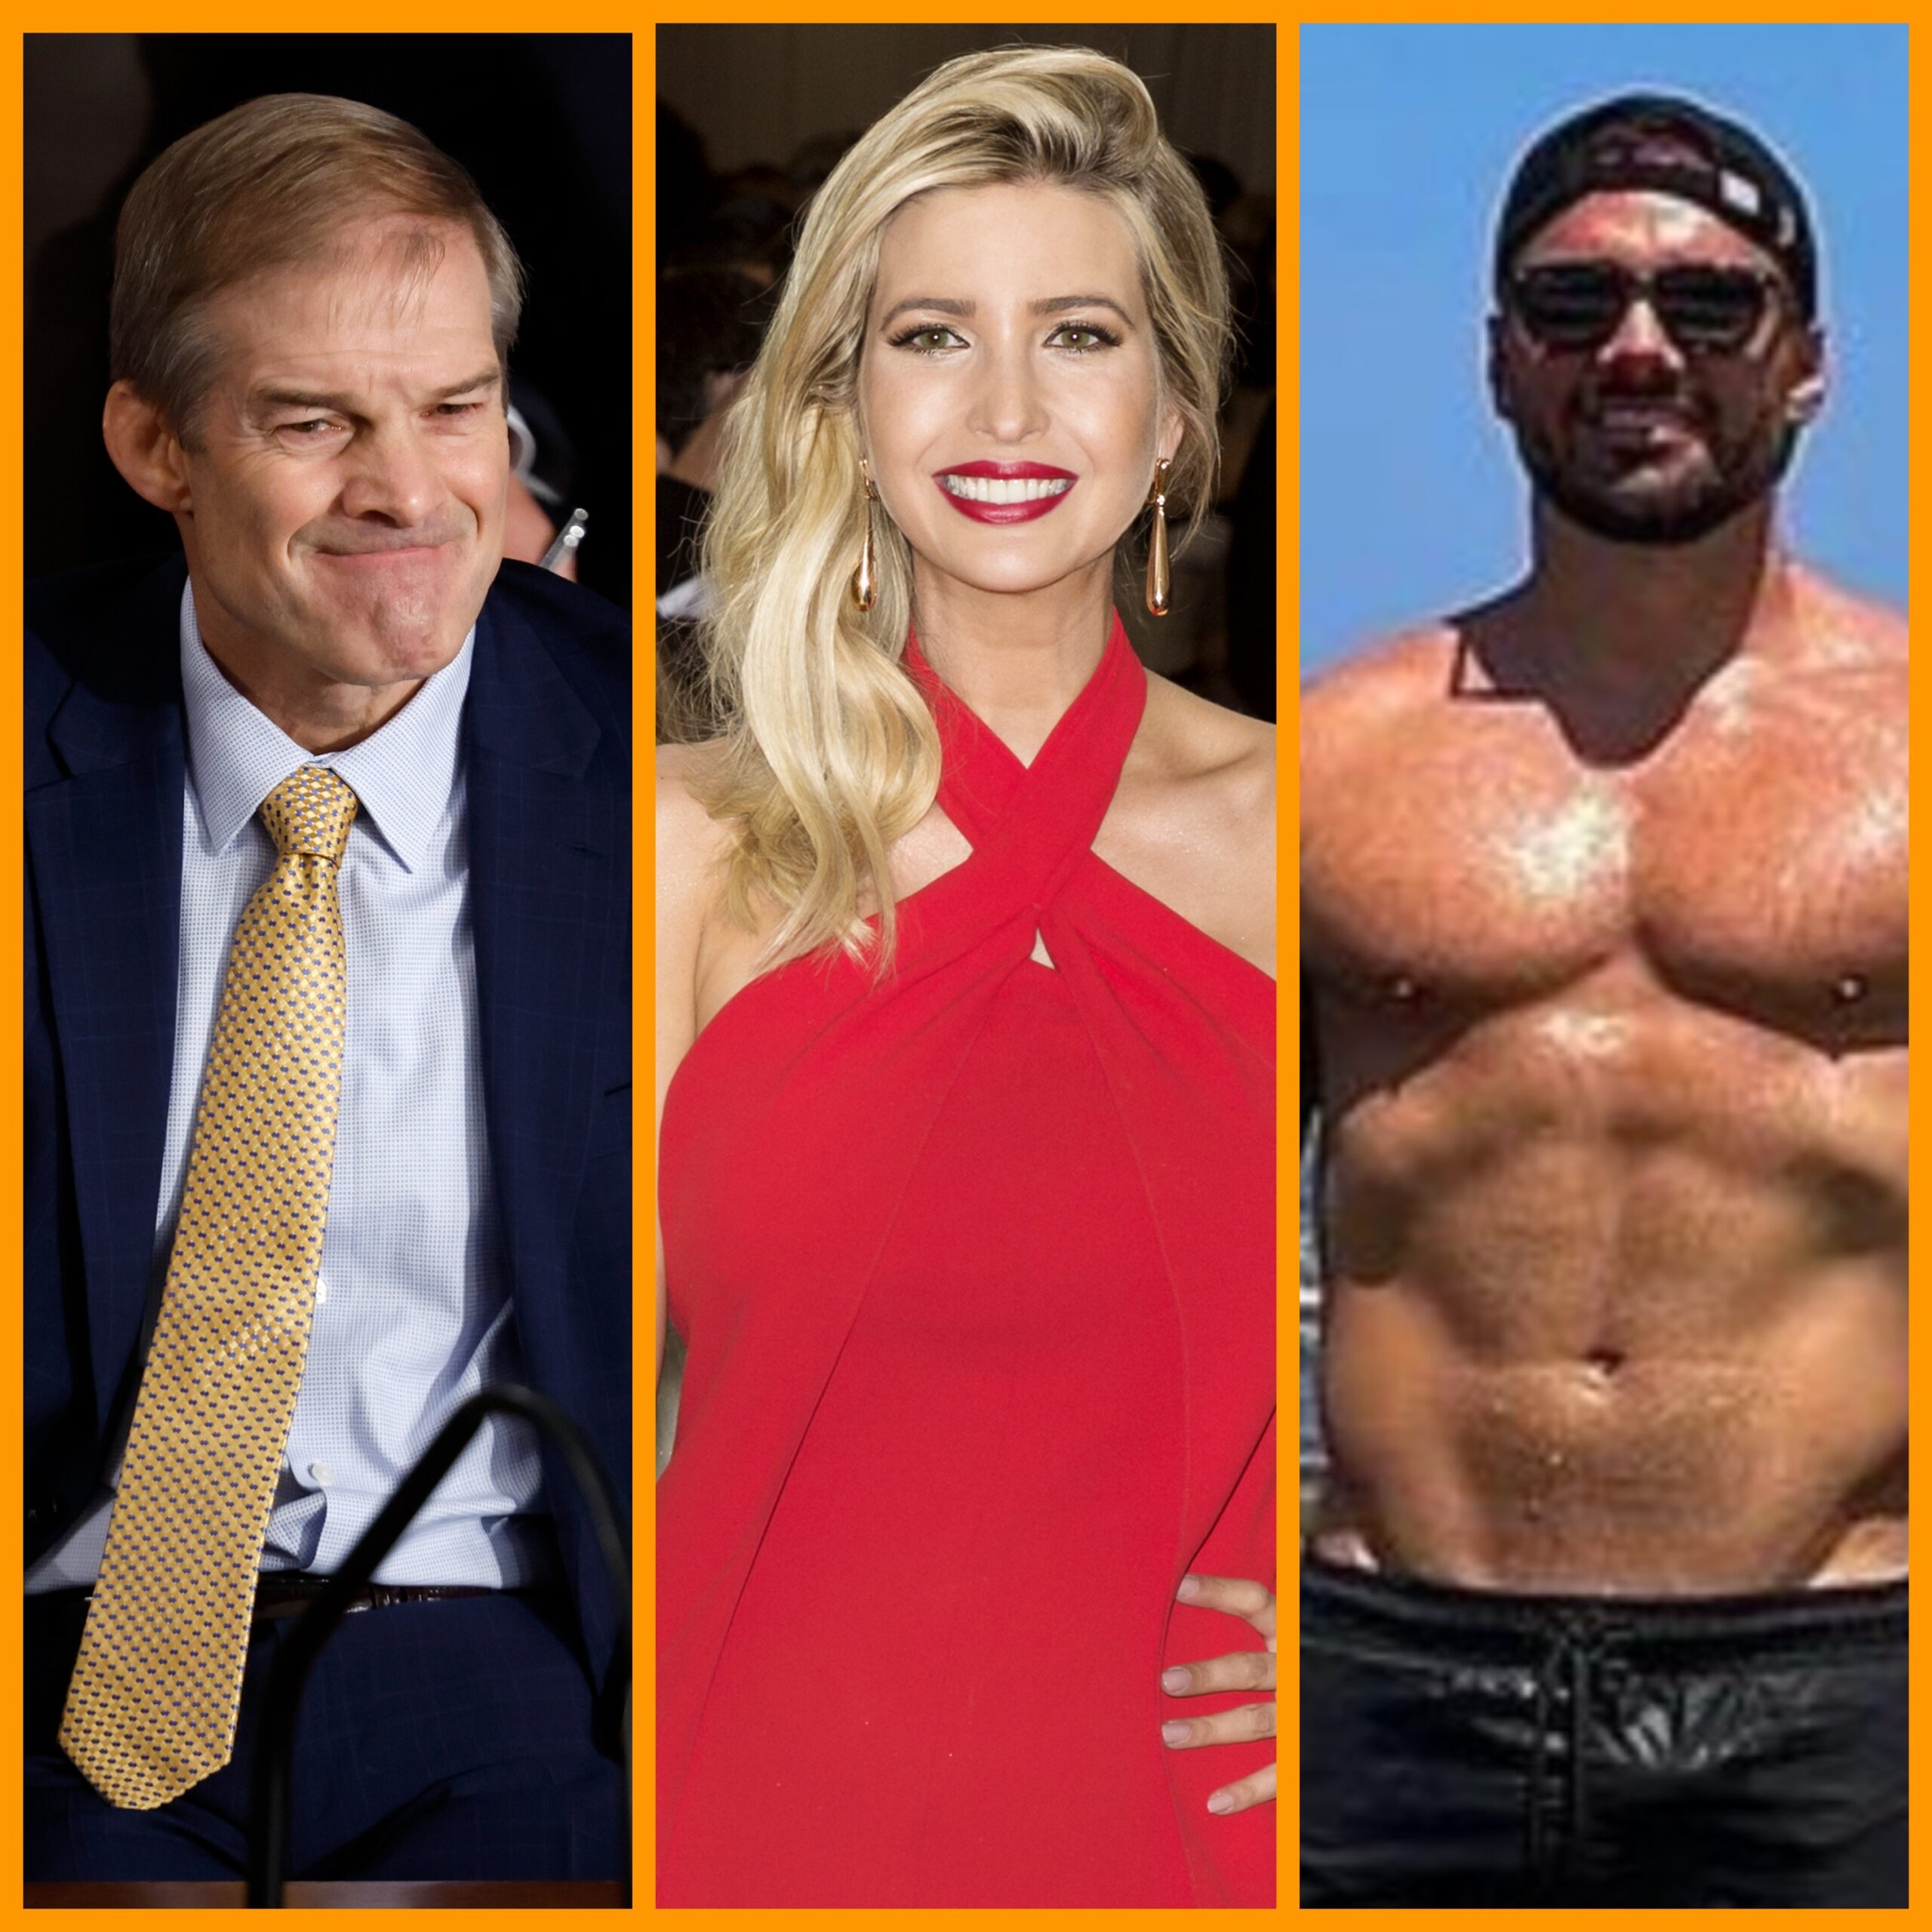 You are currently viewing Jim “Gym” Jordan implodes, Ivanka gets covered in daddy’s stink & a hunky liberal wins election